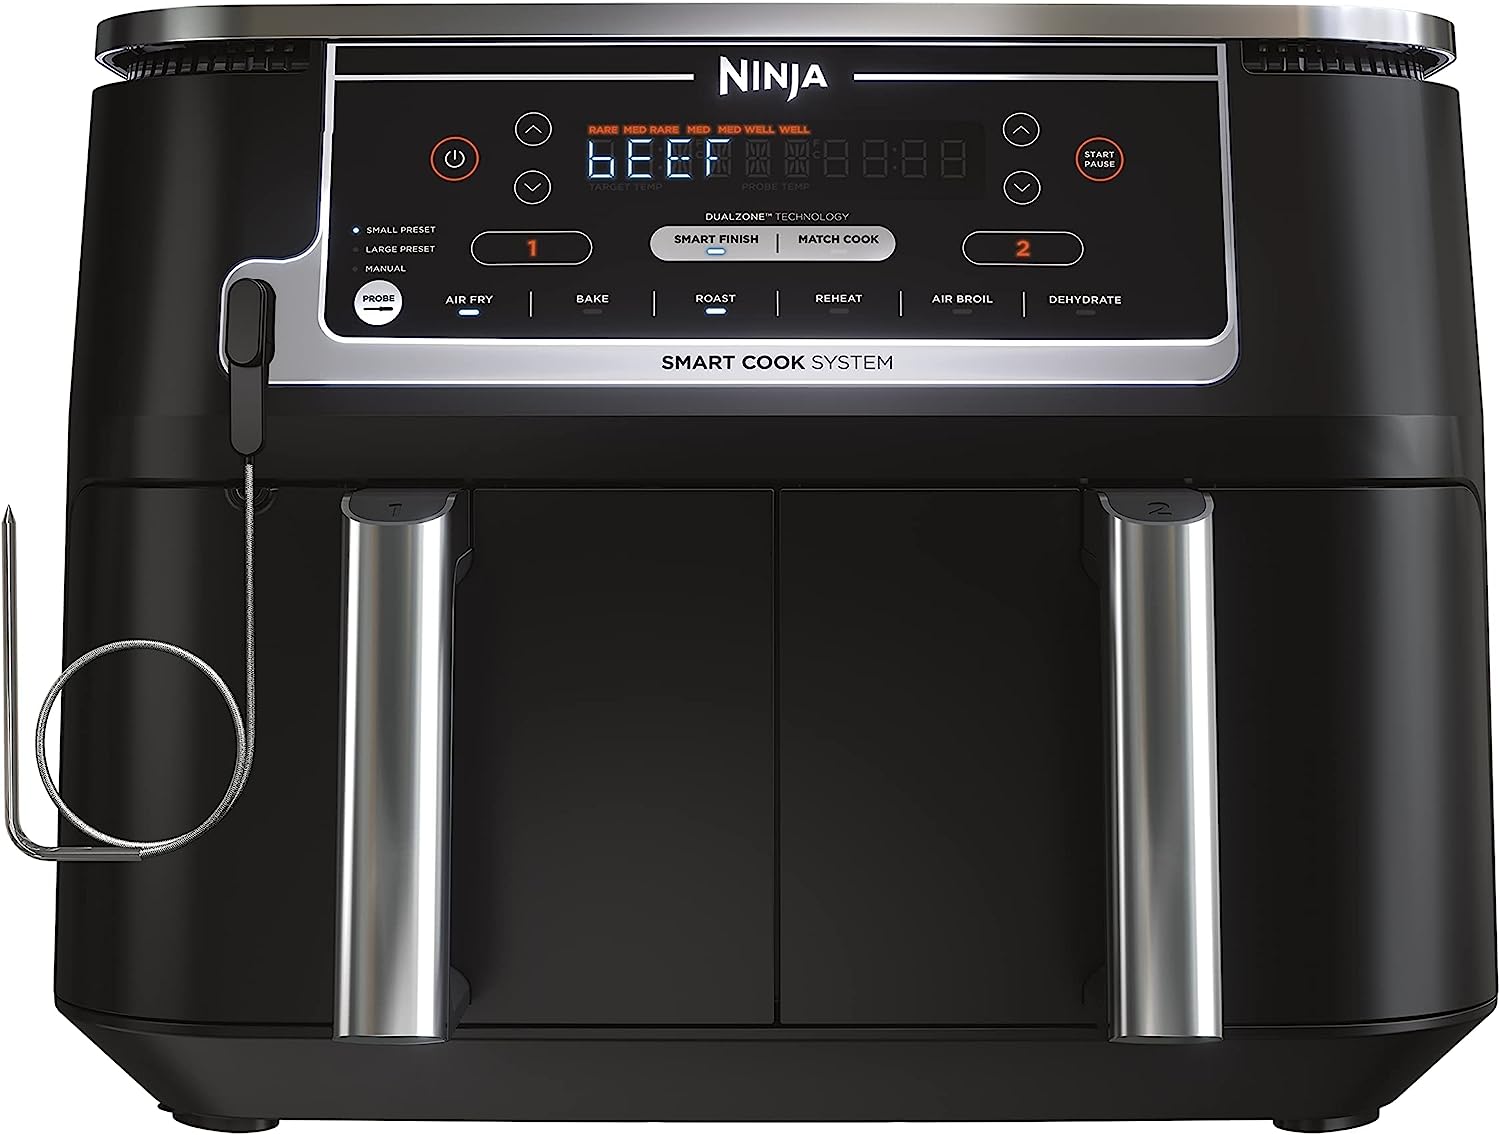 Ninja Foodi Air Fryer DZ550 ,10 Quart 6-in-1 DualZone Smart XL with 2 Independent Baskets, Smart Cook Thermometer for Perfect Doneness, Match Cook &... 